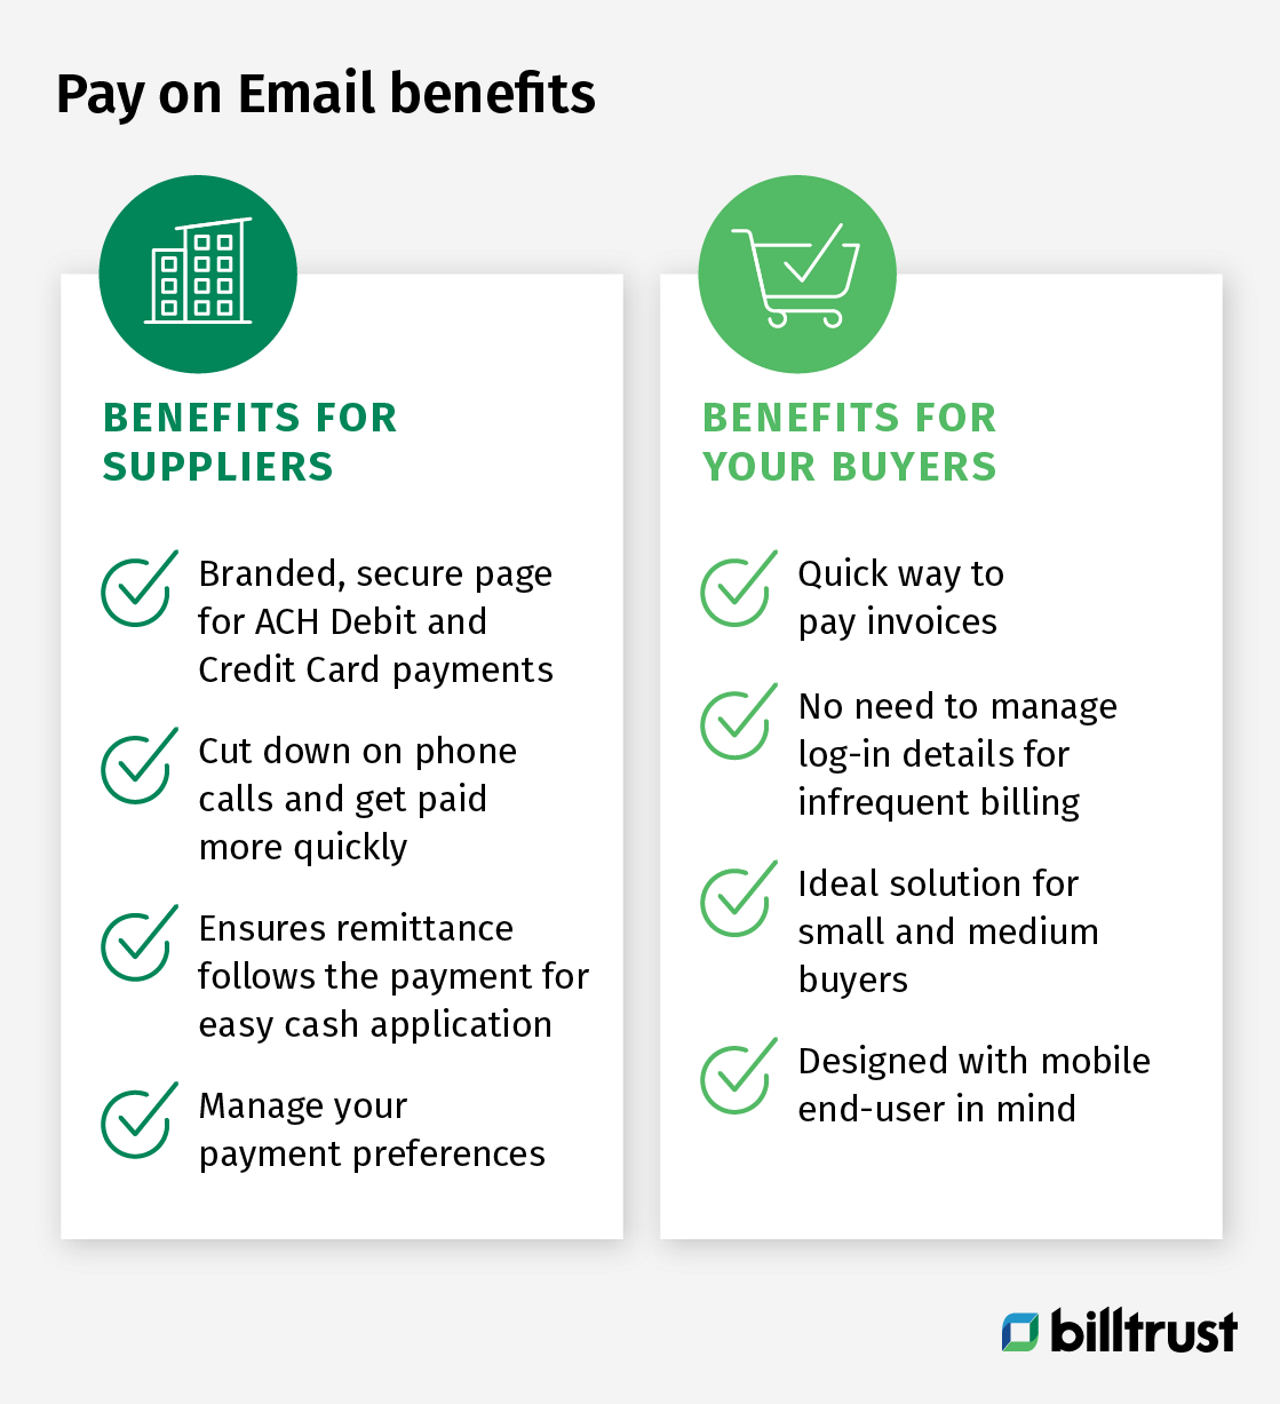 diagram showing the pay on email benefits for suppliers and buyers